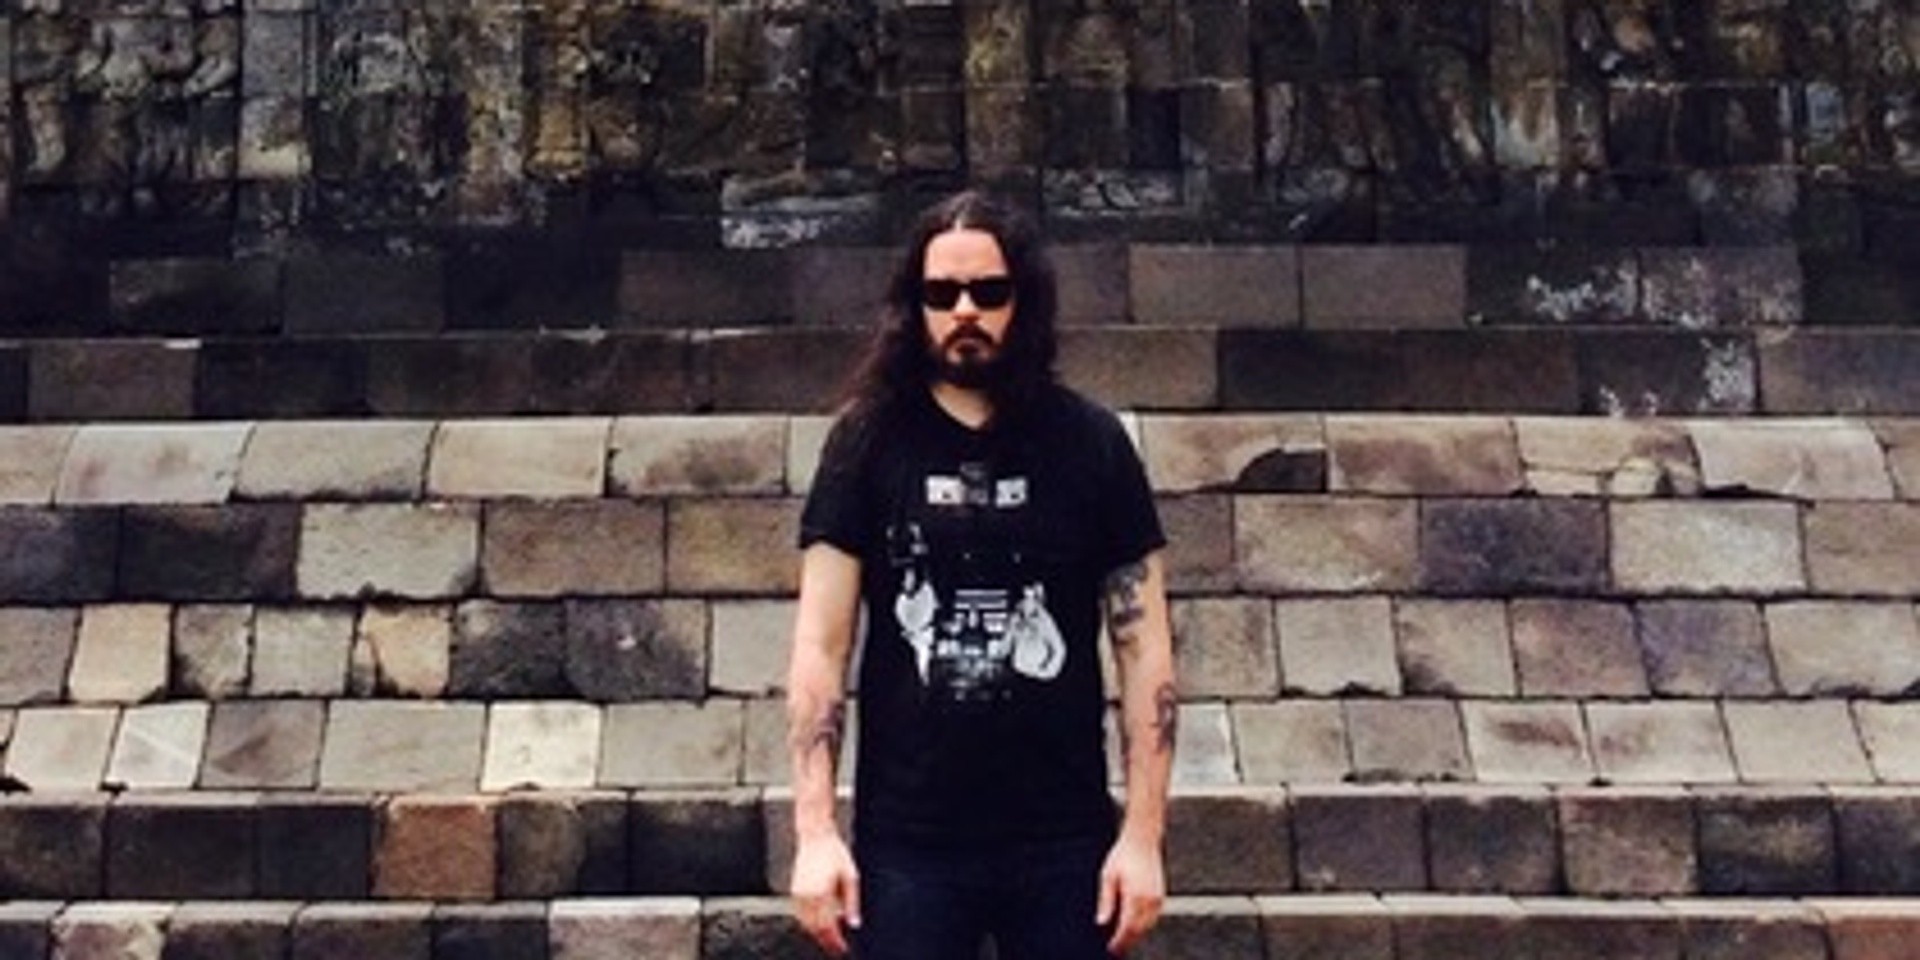 Sunn O)))'s Stephen O' Malley just got back from his research trip to Indonesia, here's what he got